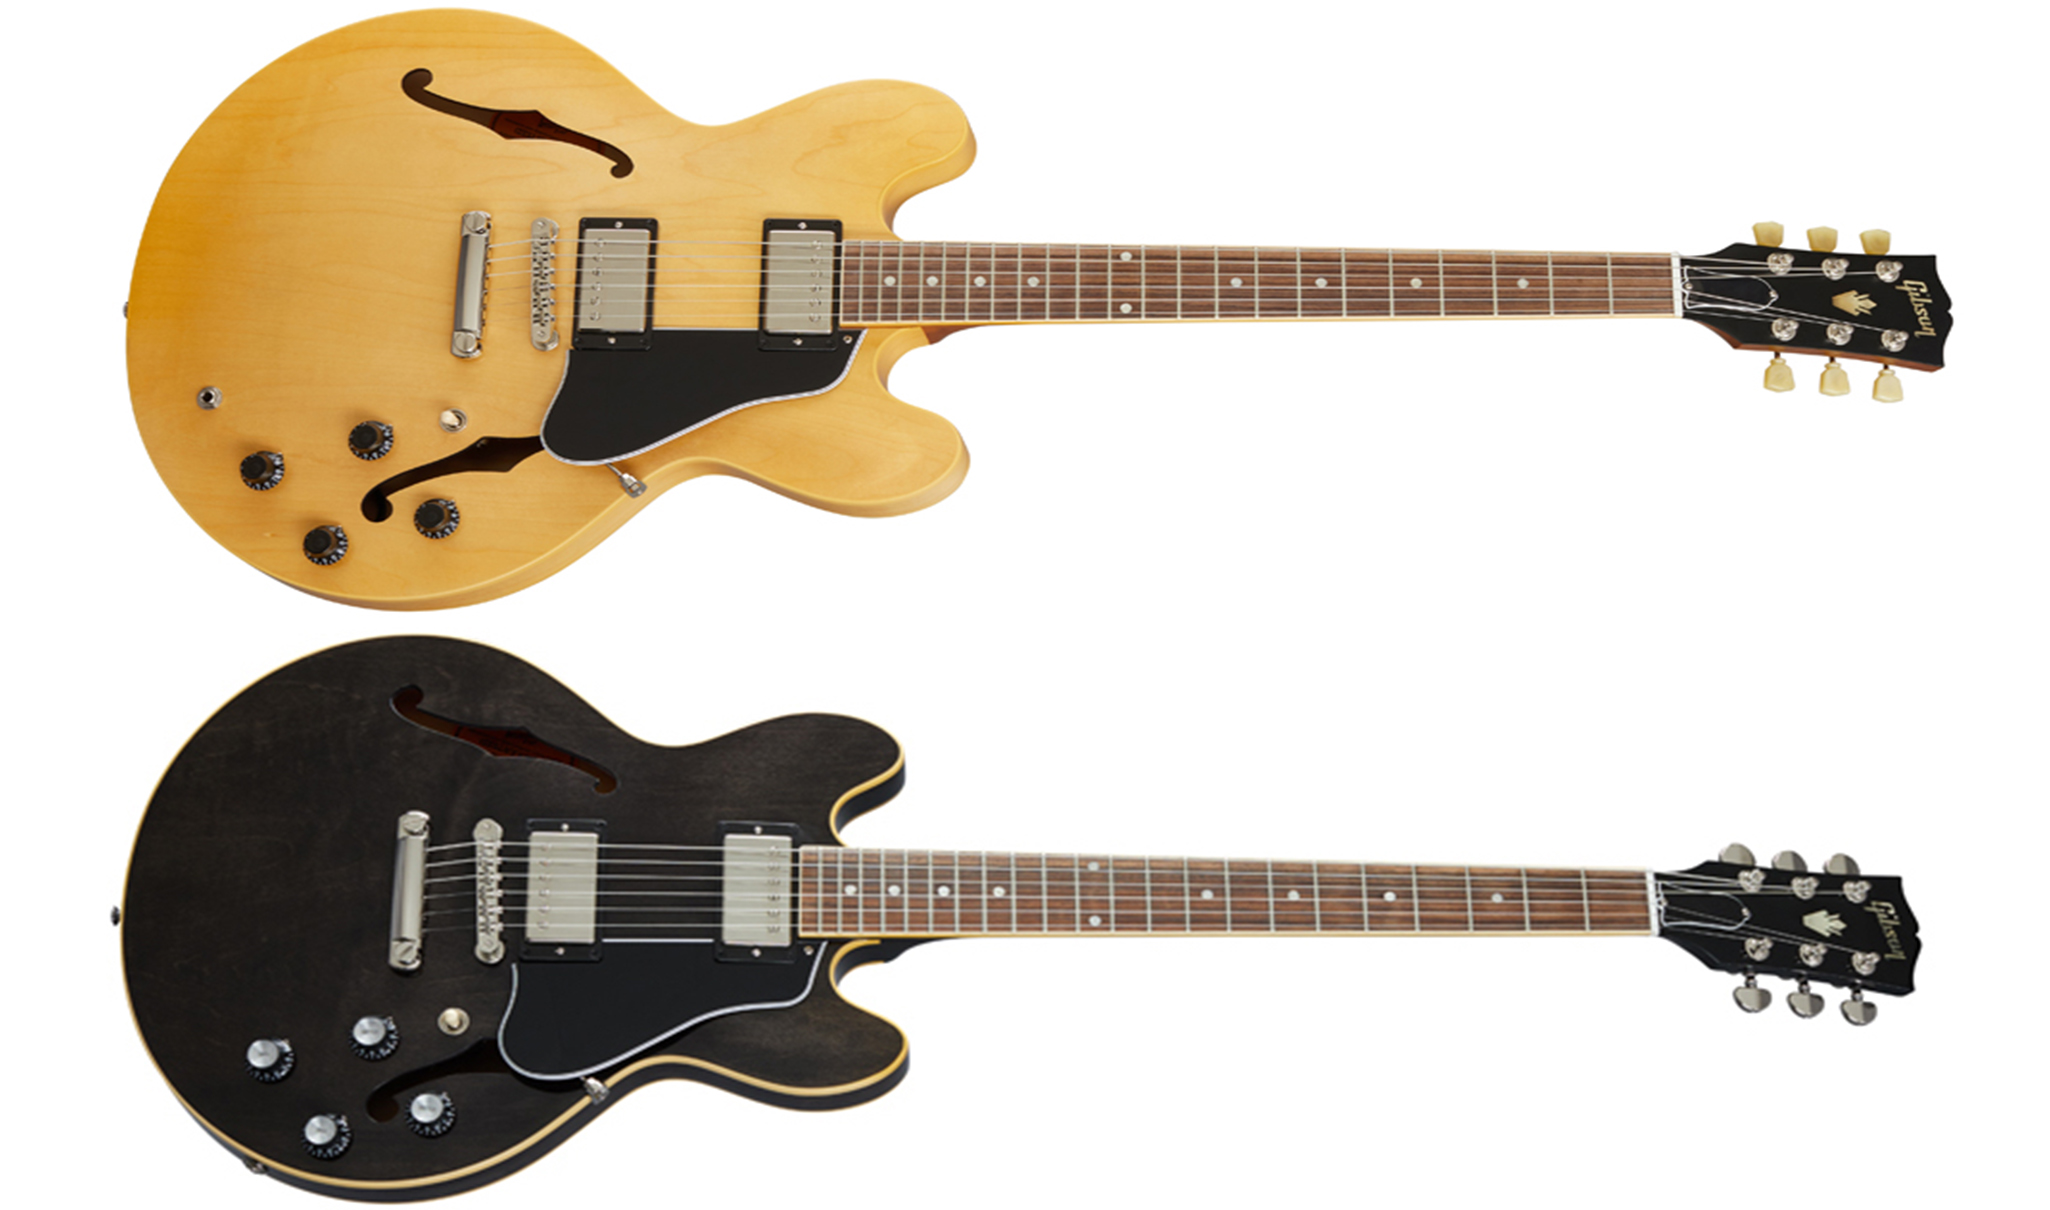 Expands Modern Collection with New ES-335 Satin, ES-339 Models | GuitarPlayer